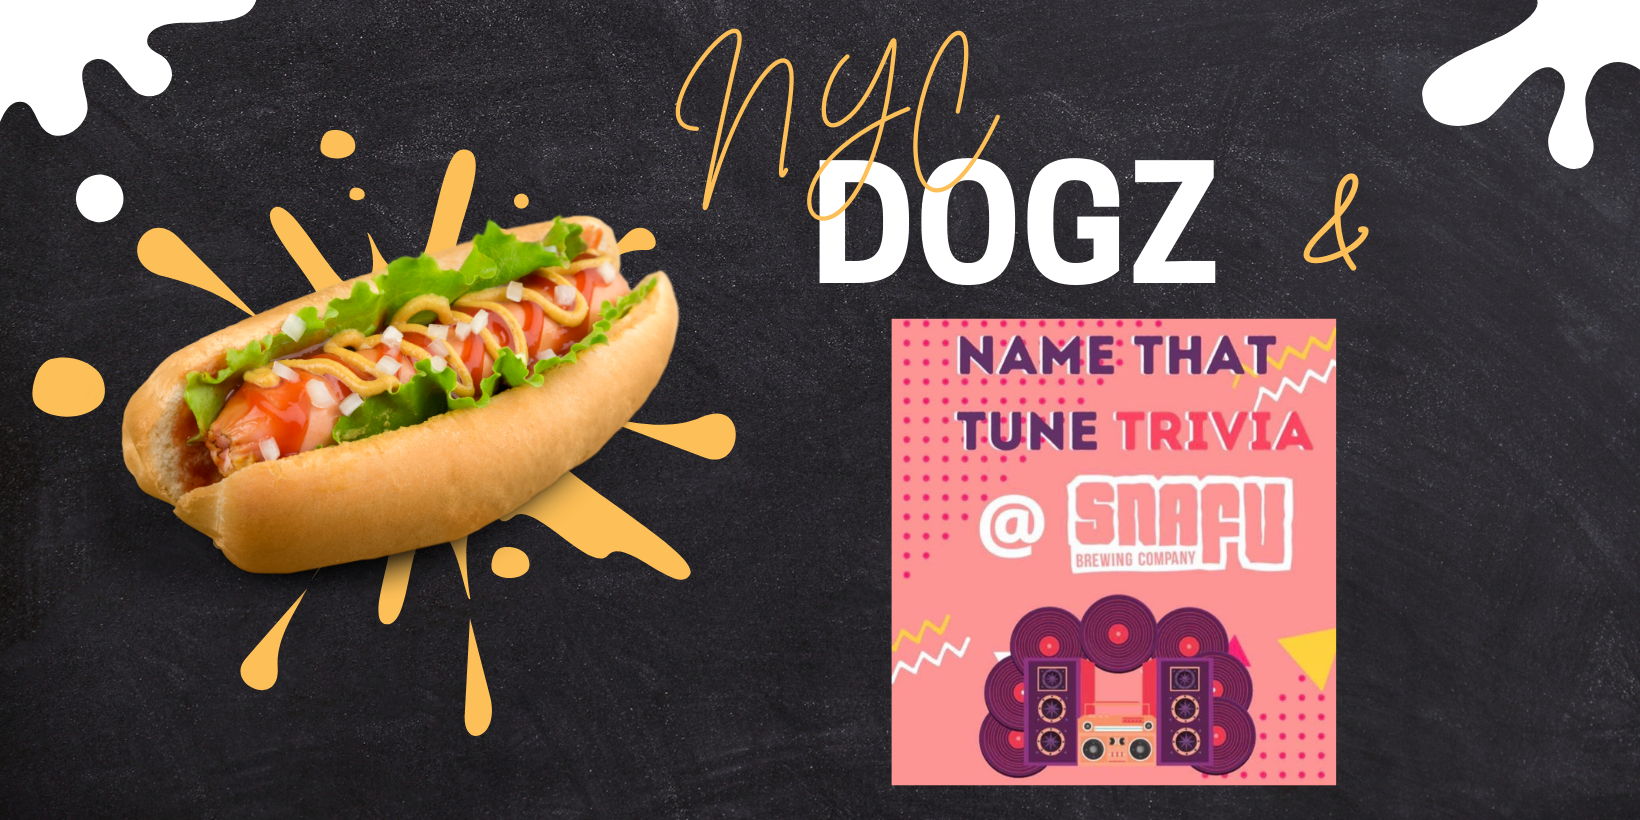 Name That Tune Music Trivia w/ NYC DOGZ promotional image